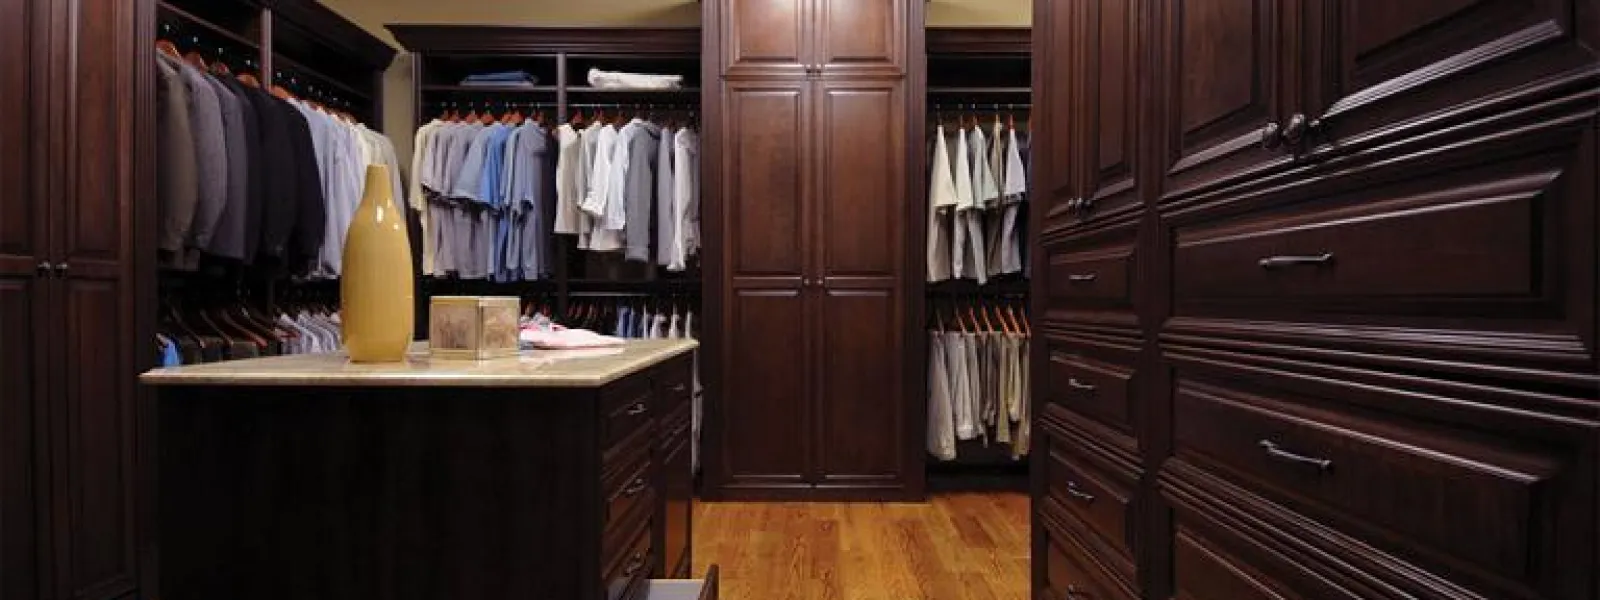 4 Reasons to Consider Custom Closets in Your Panhandle Home